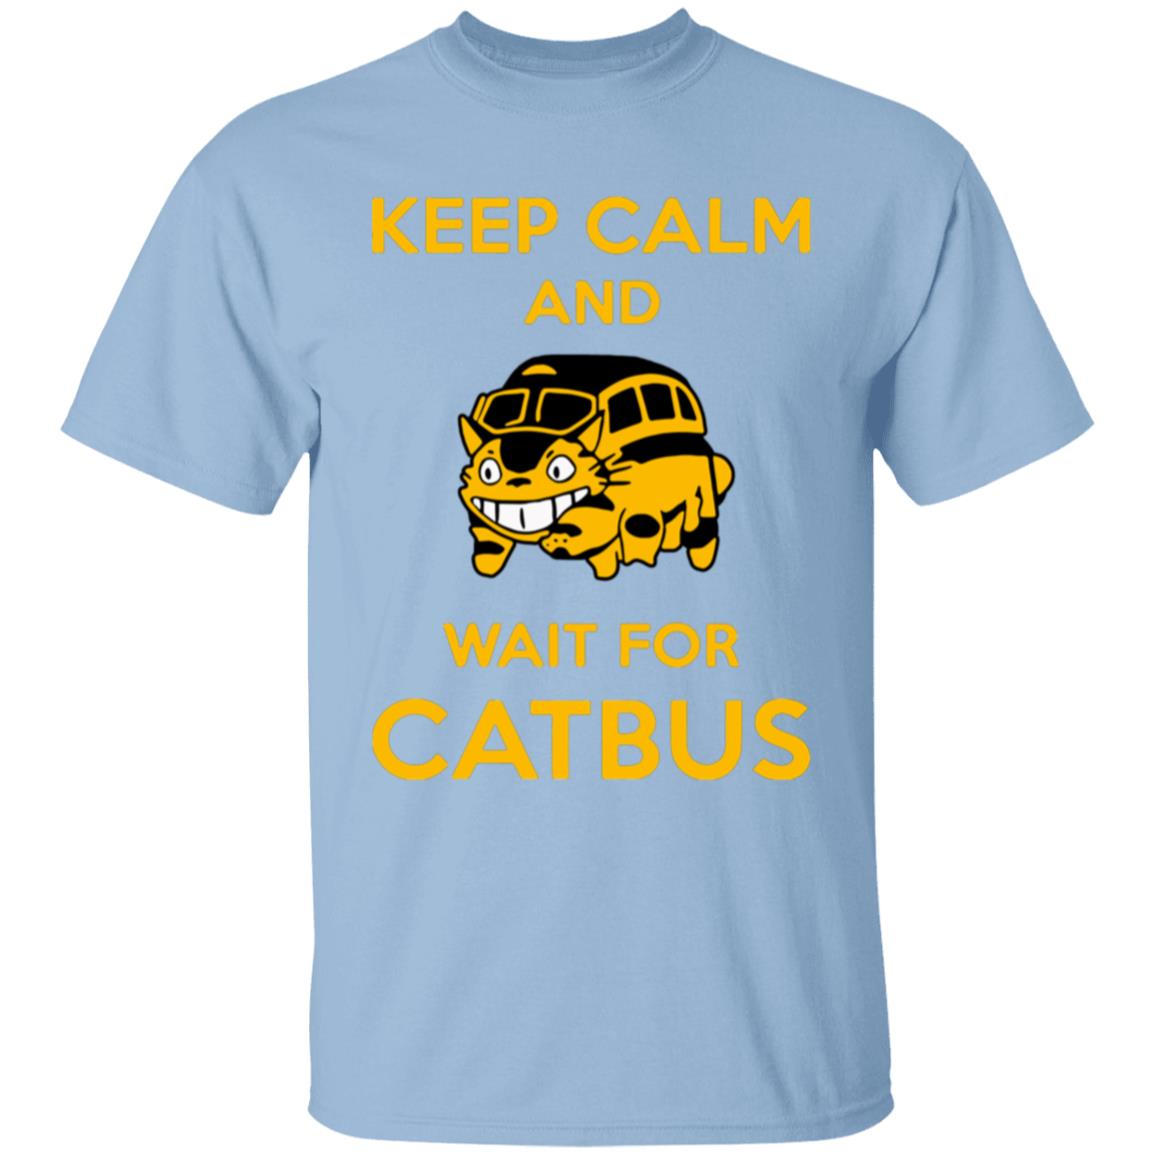 My Neighbor Totoro Keep Calm and Wait for Cat Bus T Shirt for Kid Ghibli Store ghibli.store